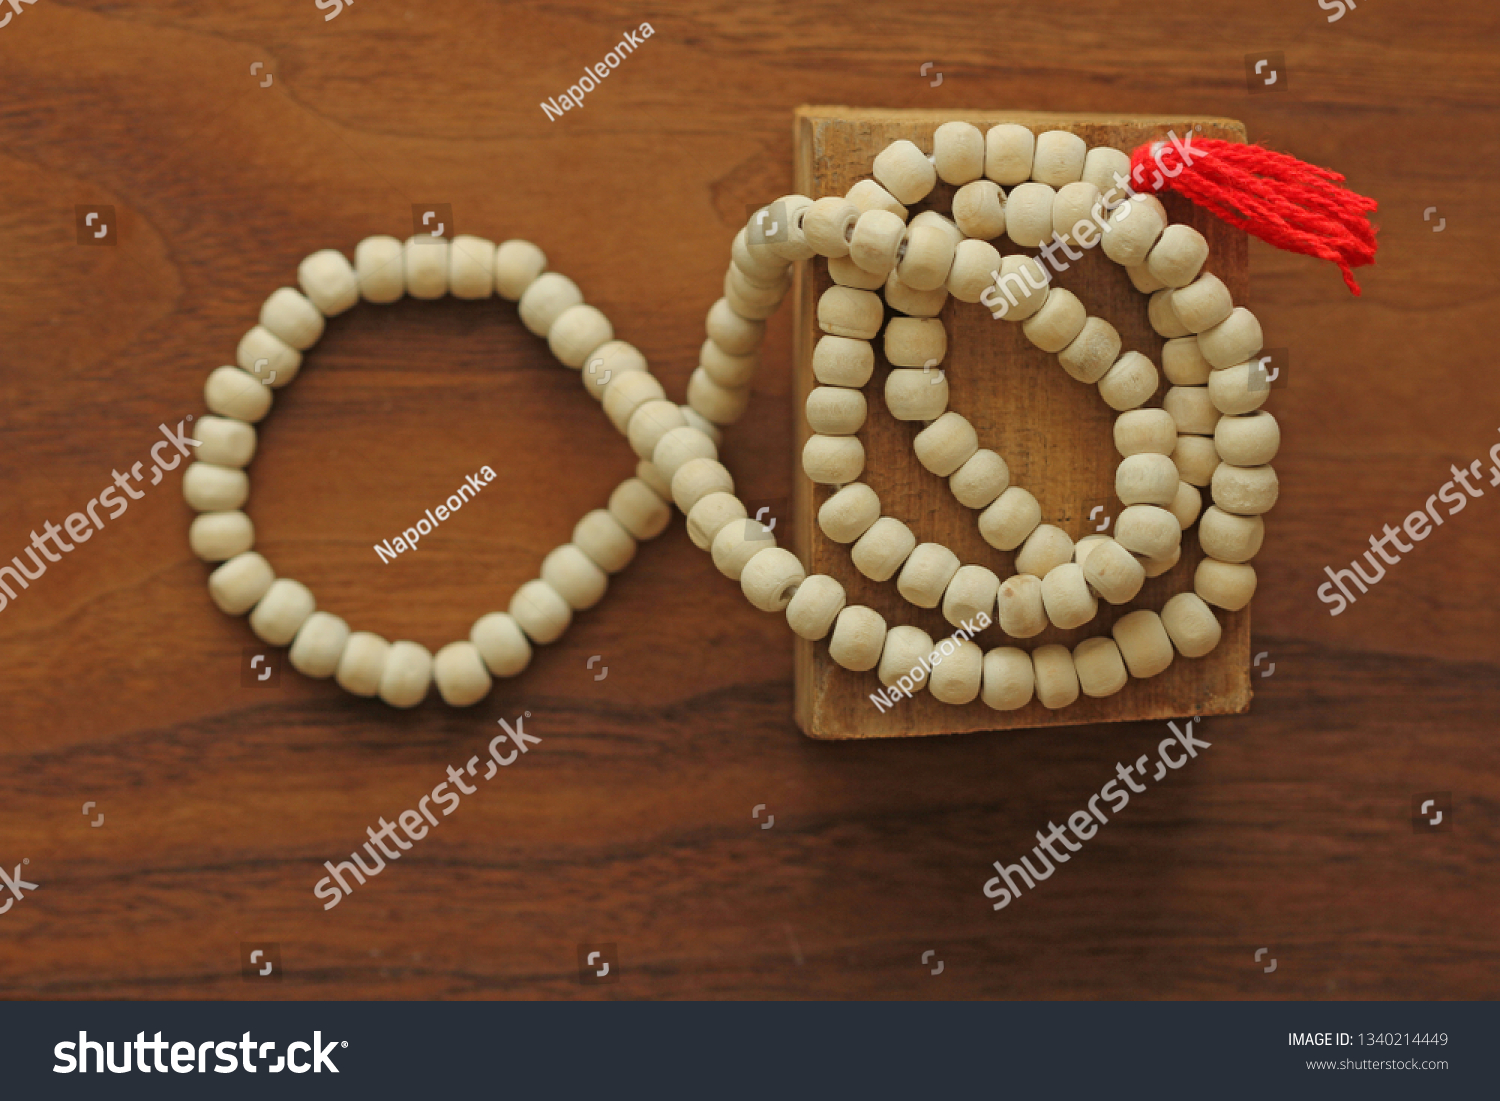 Buddhist beads. Rosary or beads from the sacred tree of Tulasi with a red tassel. #1340214449